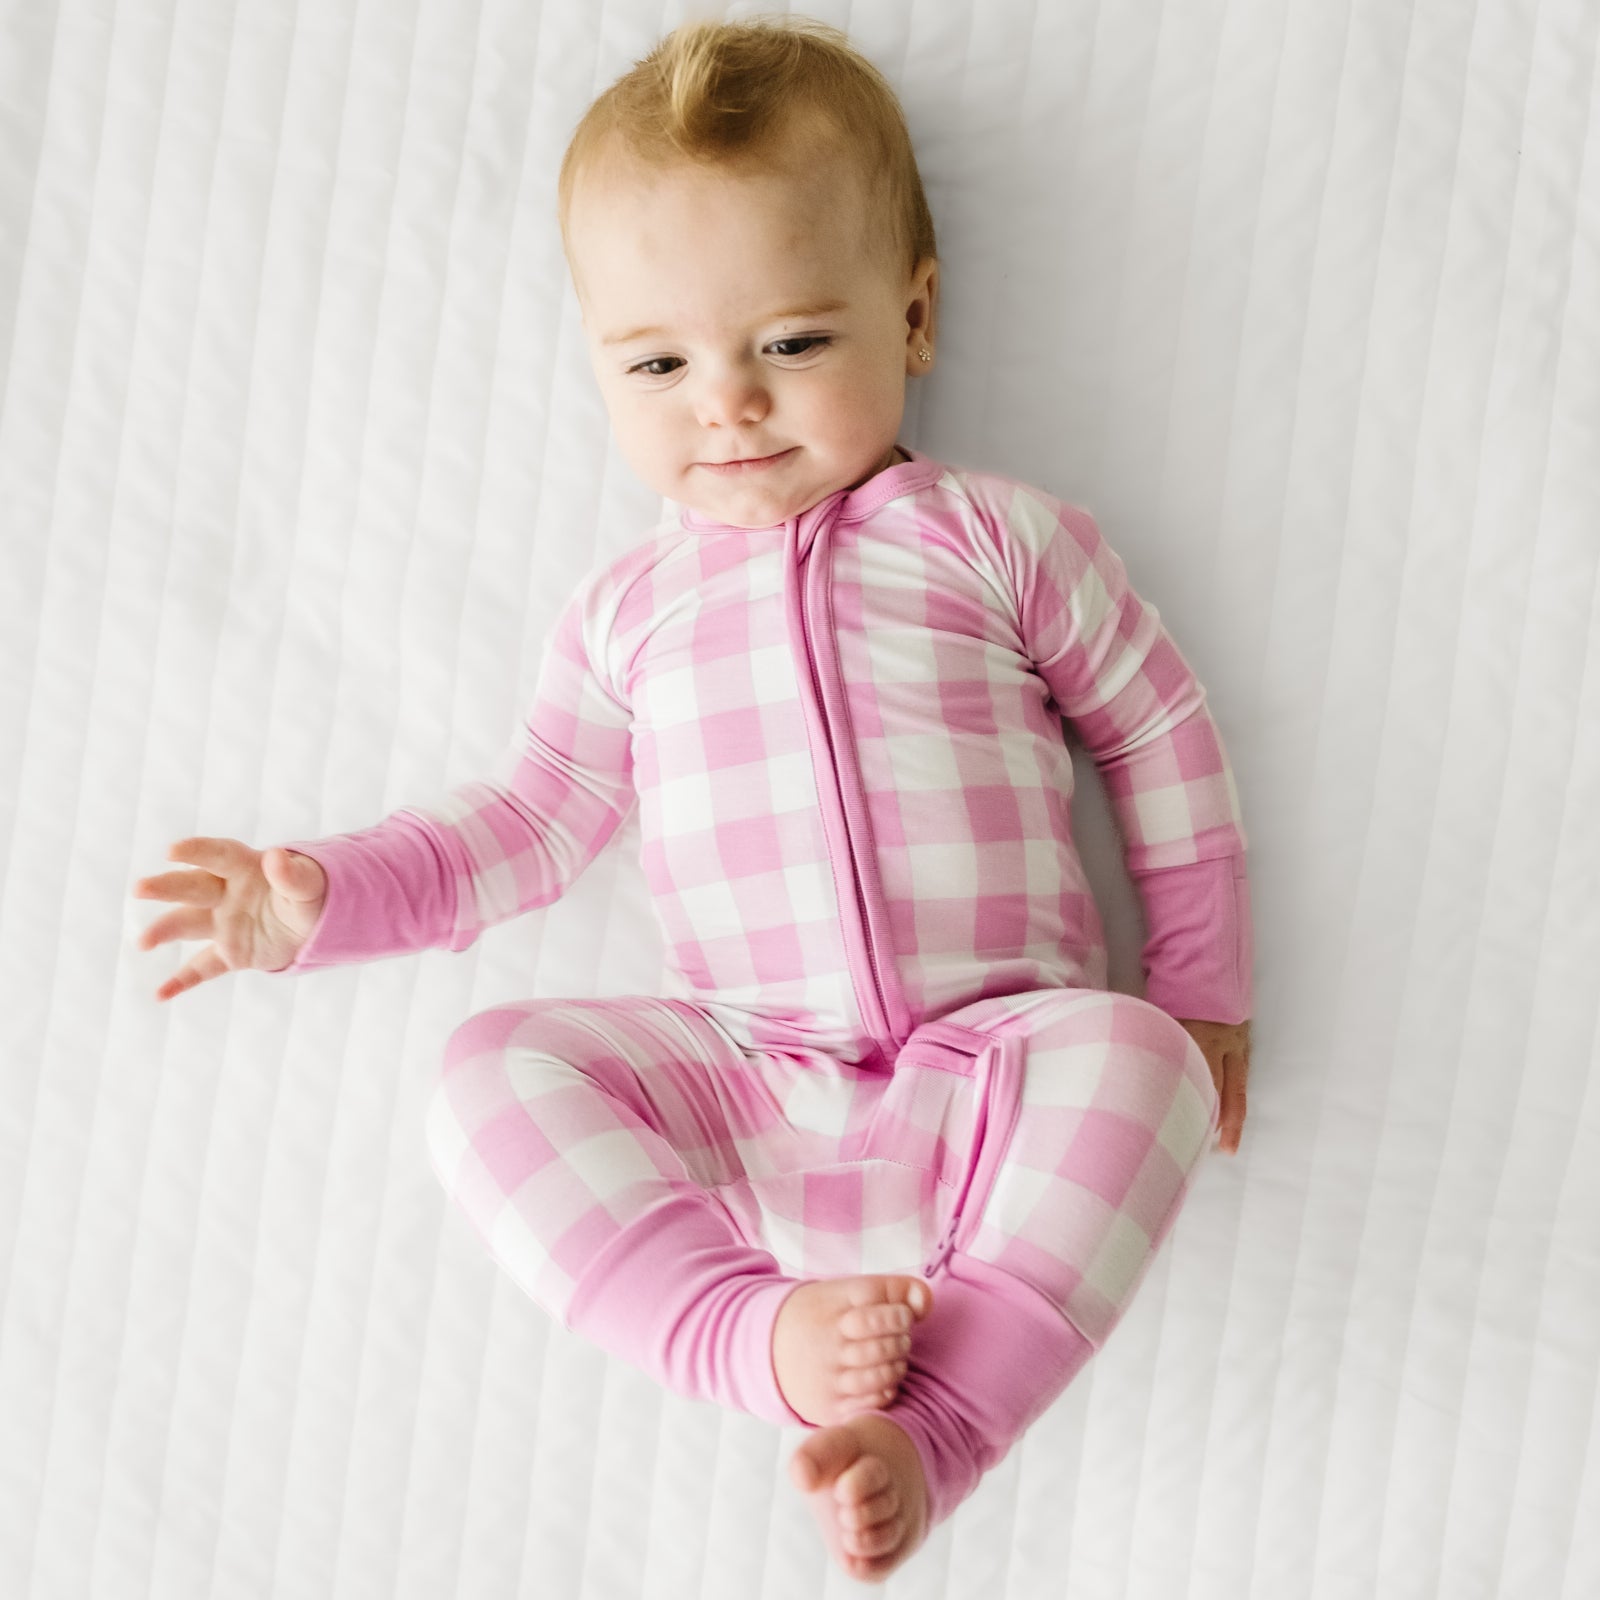 Child laying on a bed wearing a Pink Gingham zippy